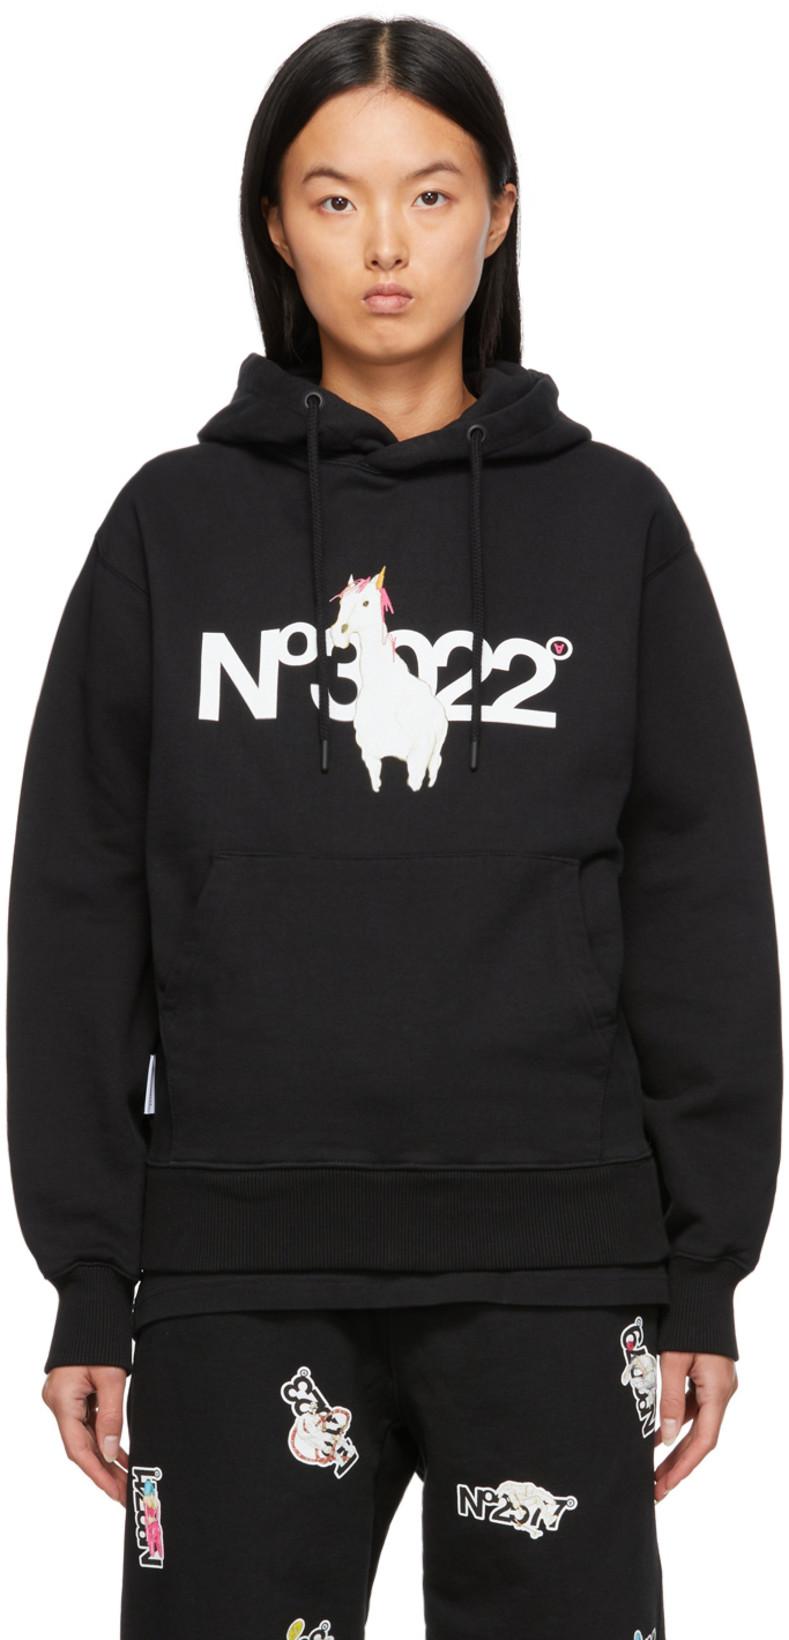 SSENSE Exclusive Black 'No3022' Hoodie by AITOR THROUP'S THEDSA